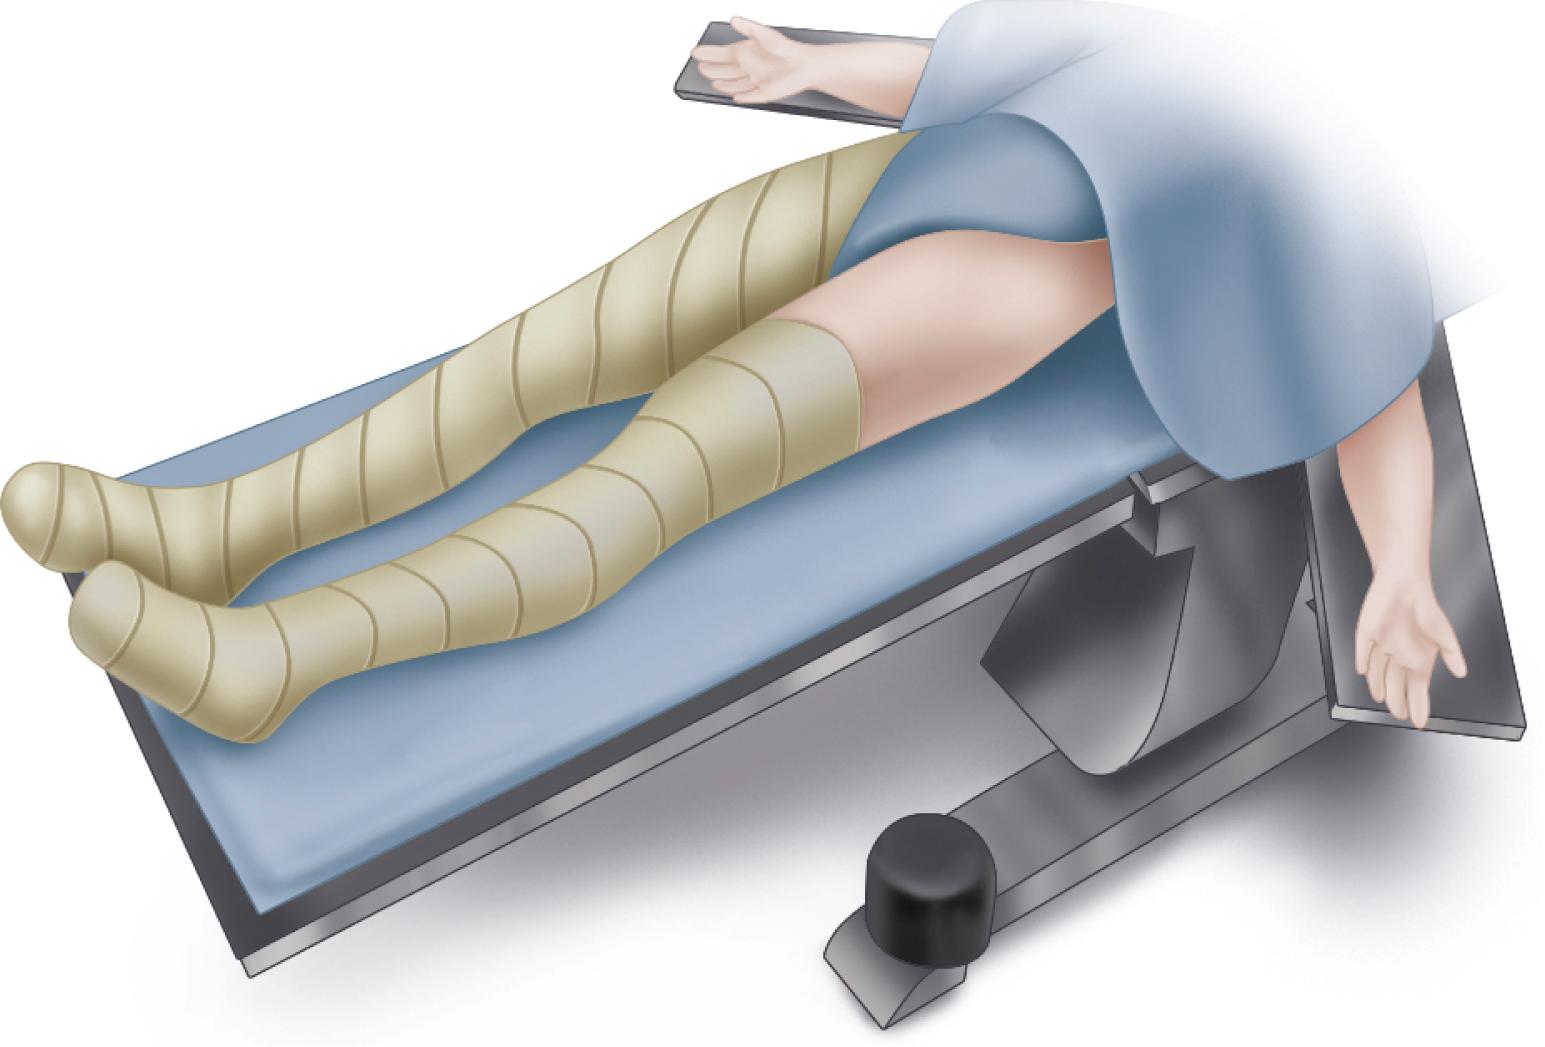 FIGURE 3.61, Direct anterior approach. Patient positioned supine with anterior superior iliac spine placed at level of table break. (Redrawn from Biomet.) SEE TECHNIQUE 3.7.